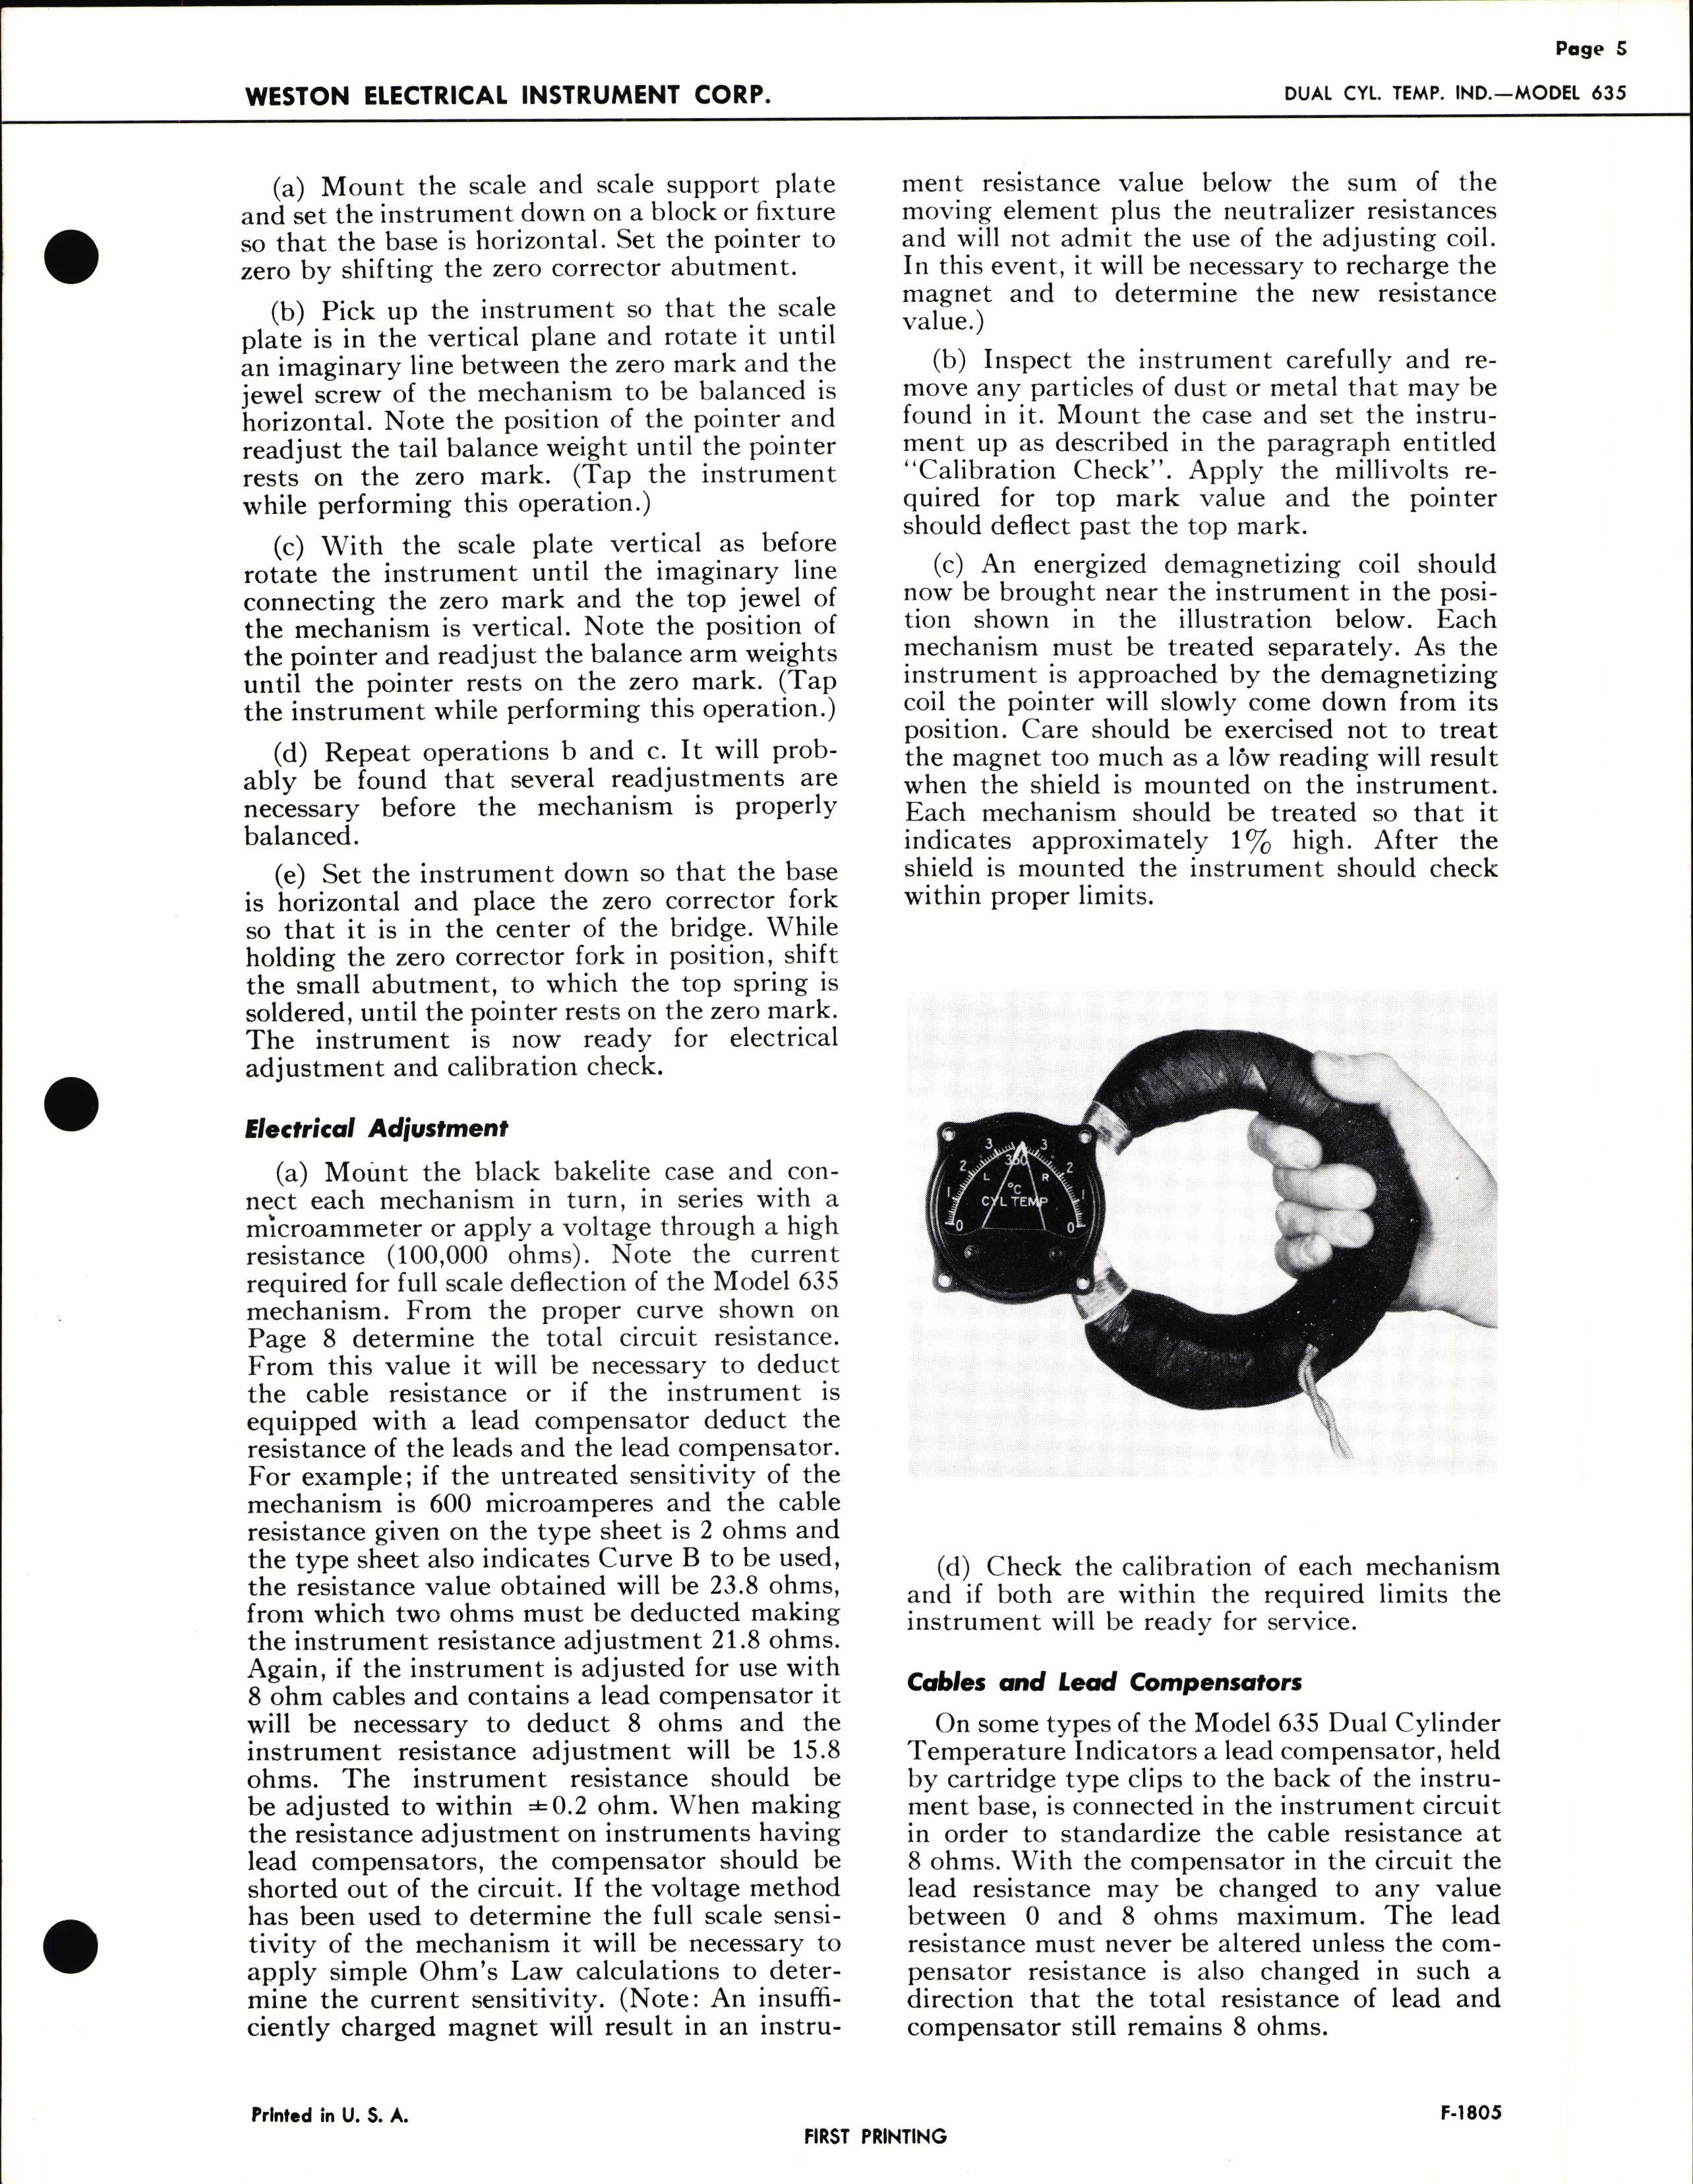 Sample page 5 from AirCorps Library document: Service Instructions for model 635 Dual Cylinder Temperature Indicators